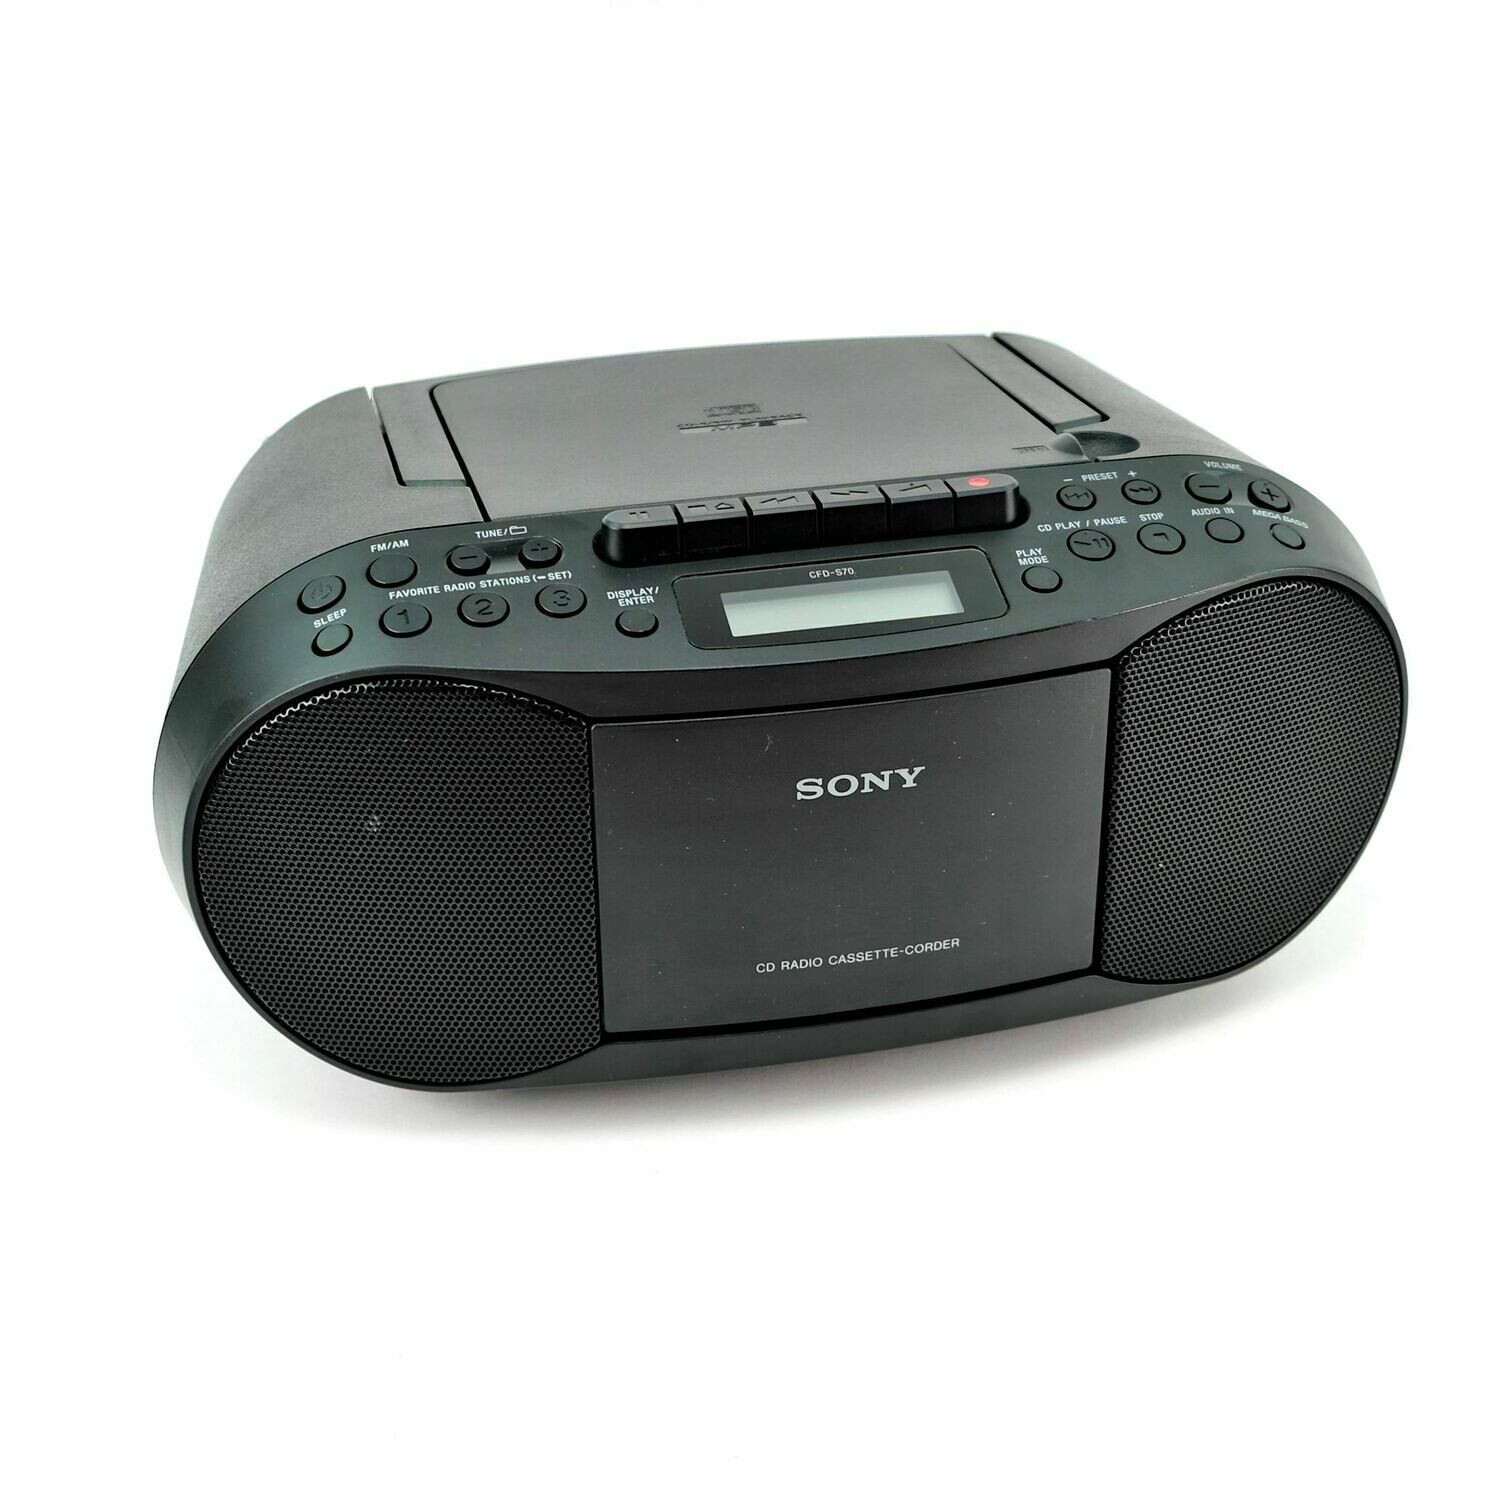 Sony CFD-S70 CD and Cassette Player With Radio